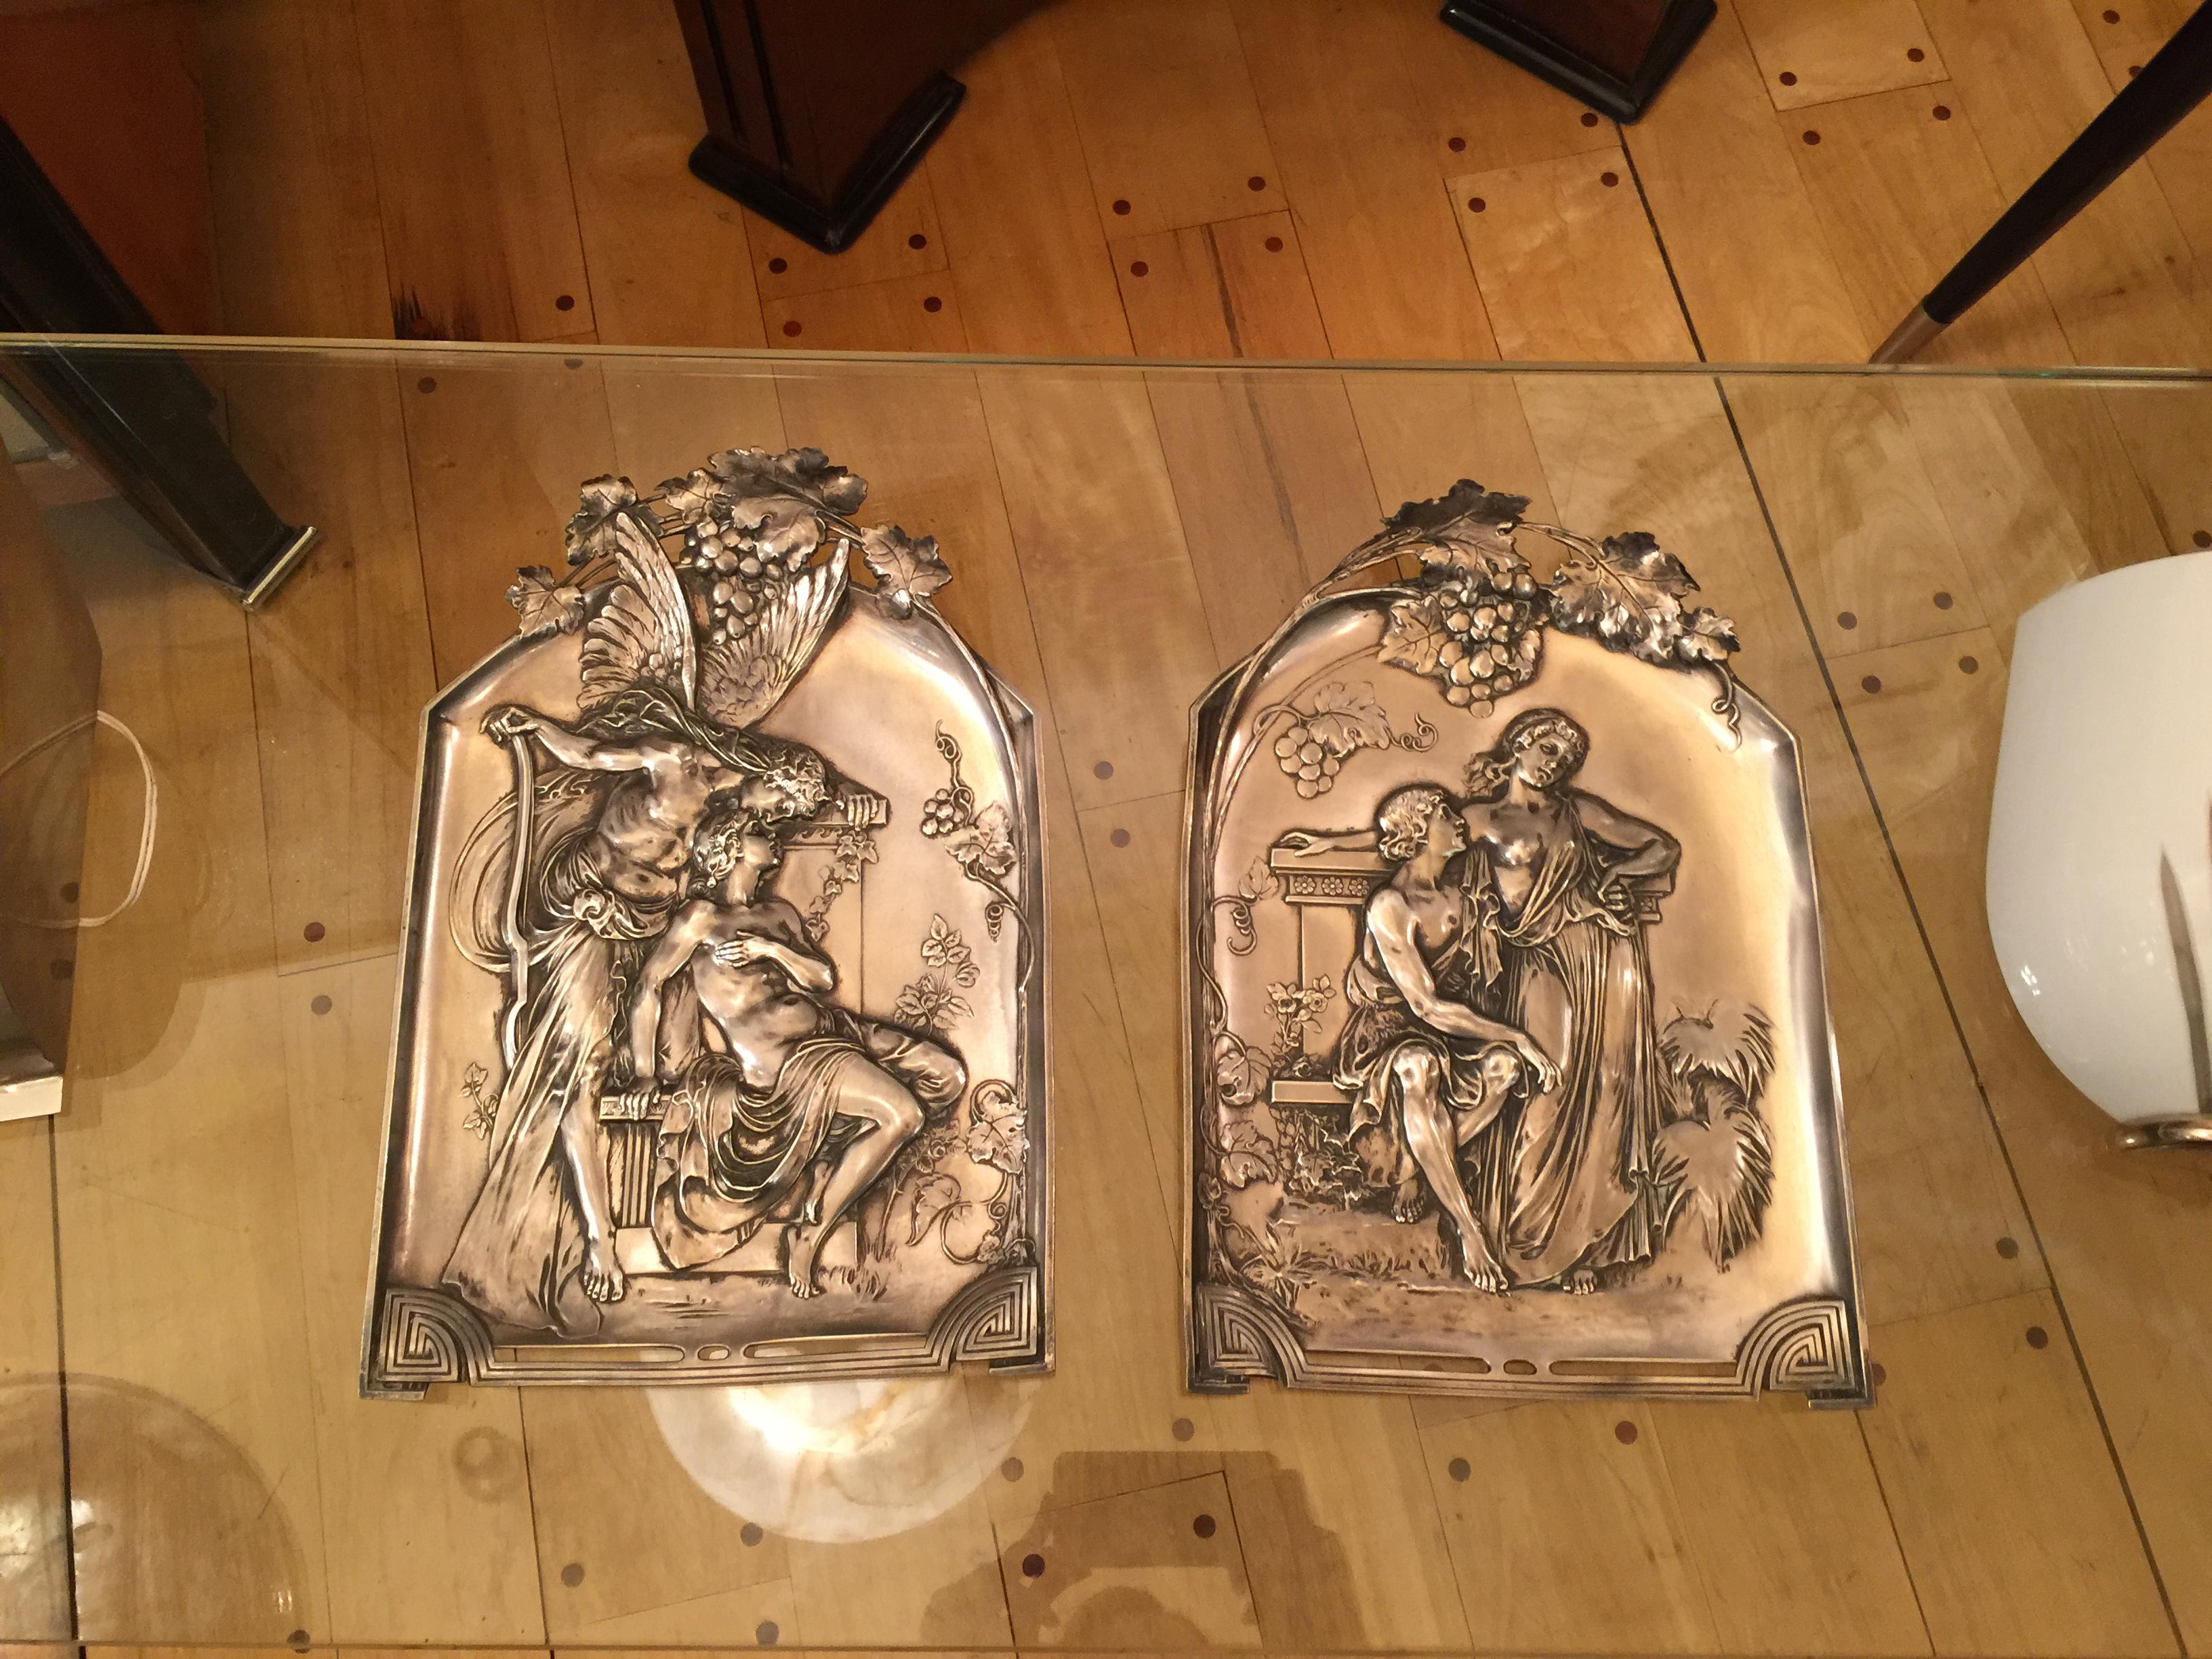 2 wall plates WMF

Style: Jugendstil, Art Nouveau, Liberty
year: 1909
Country: Germany
Materials: silver plated 
Several of the WMF objects can be seen in museums.
We have specialized in the sale of Art Deco and Art Nouveau and Vintage styles since